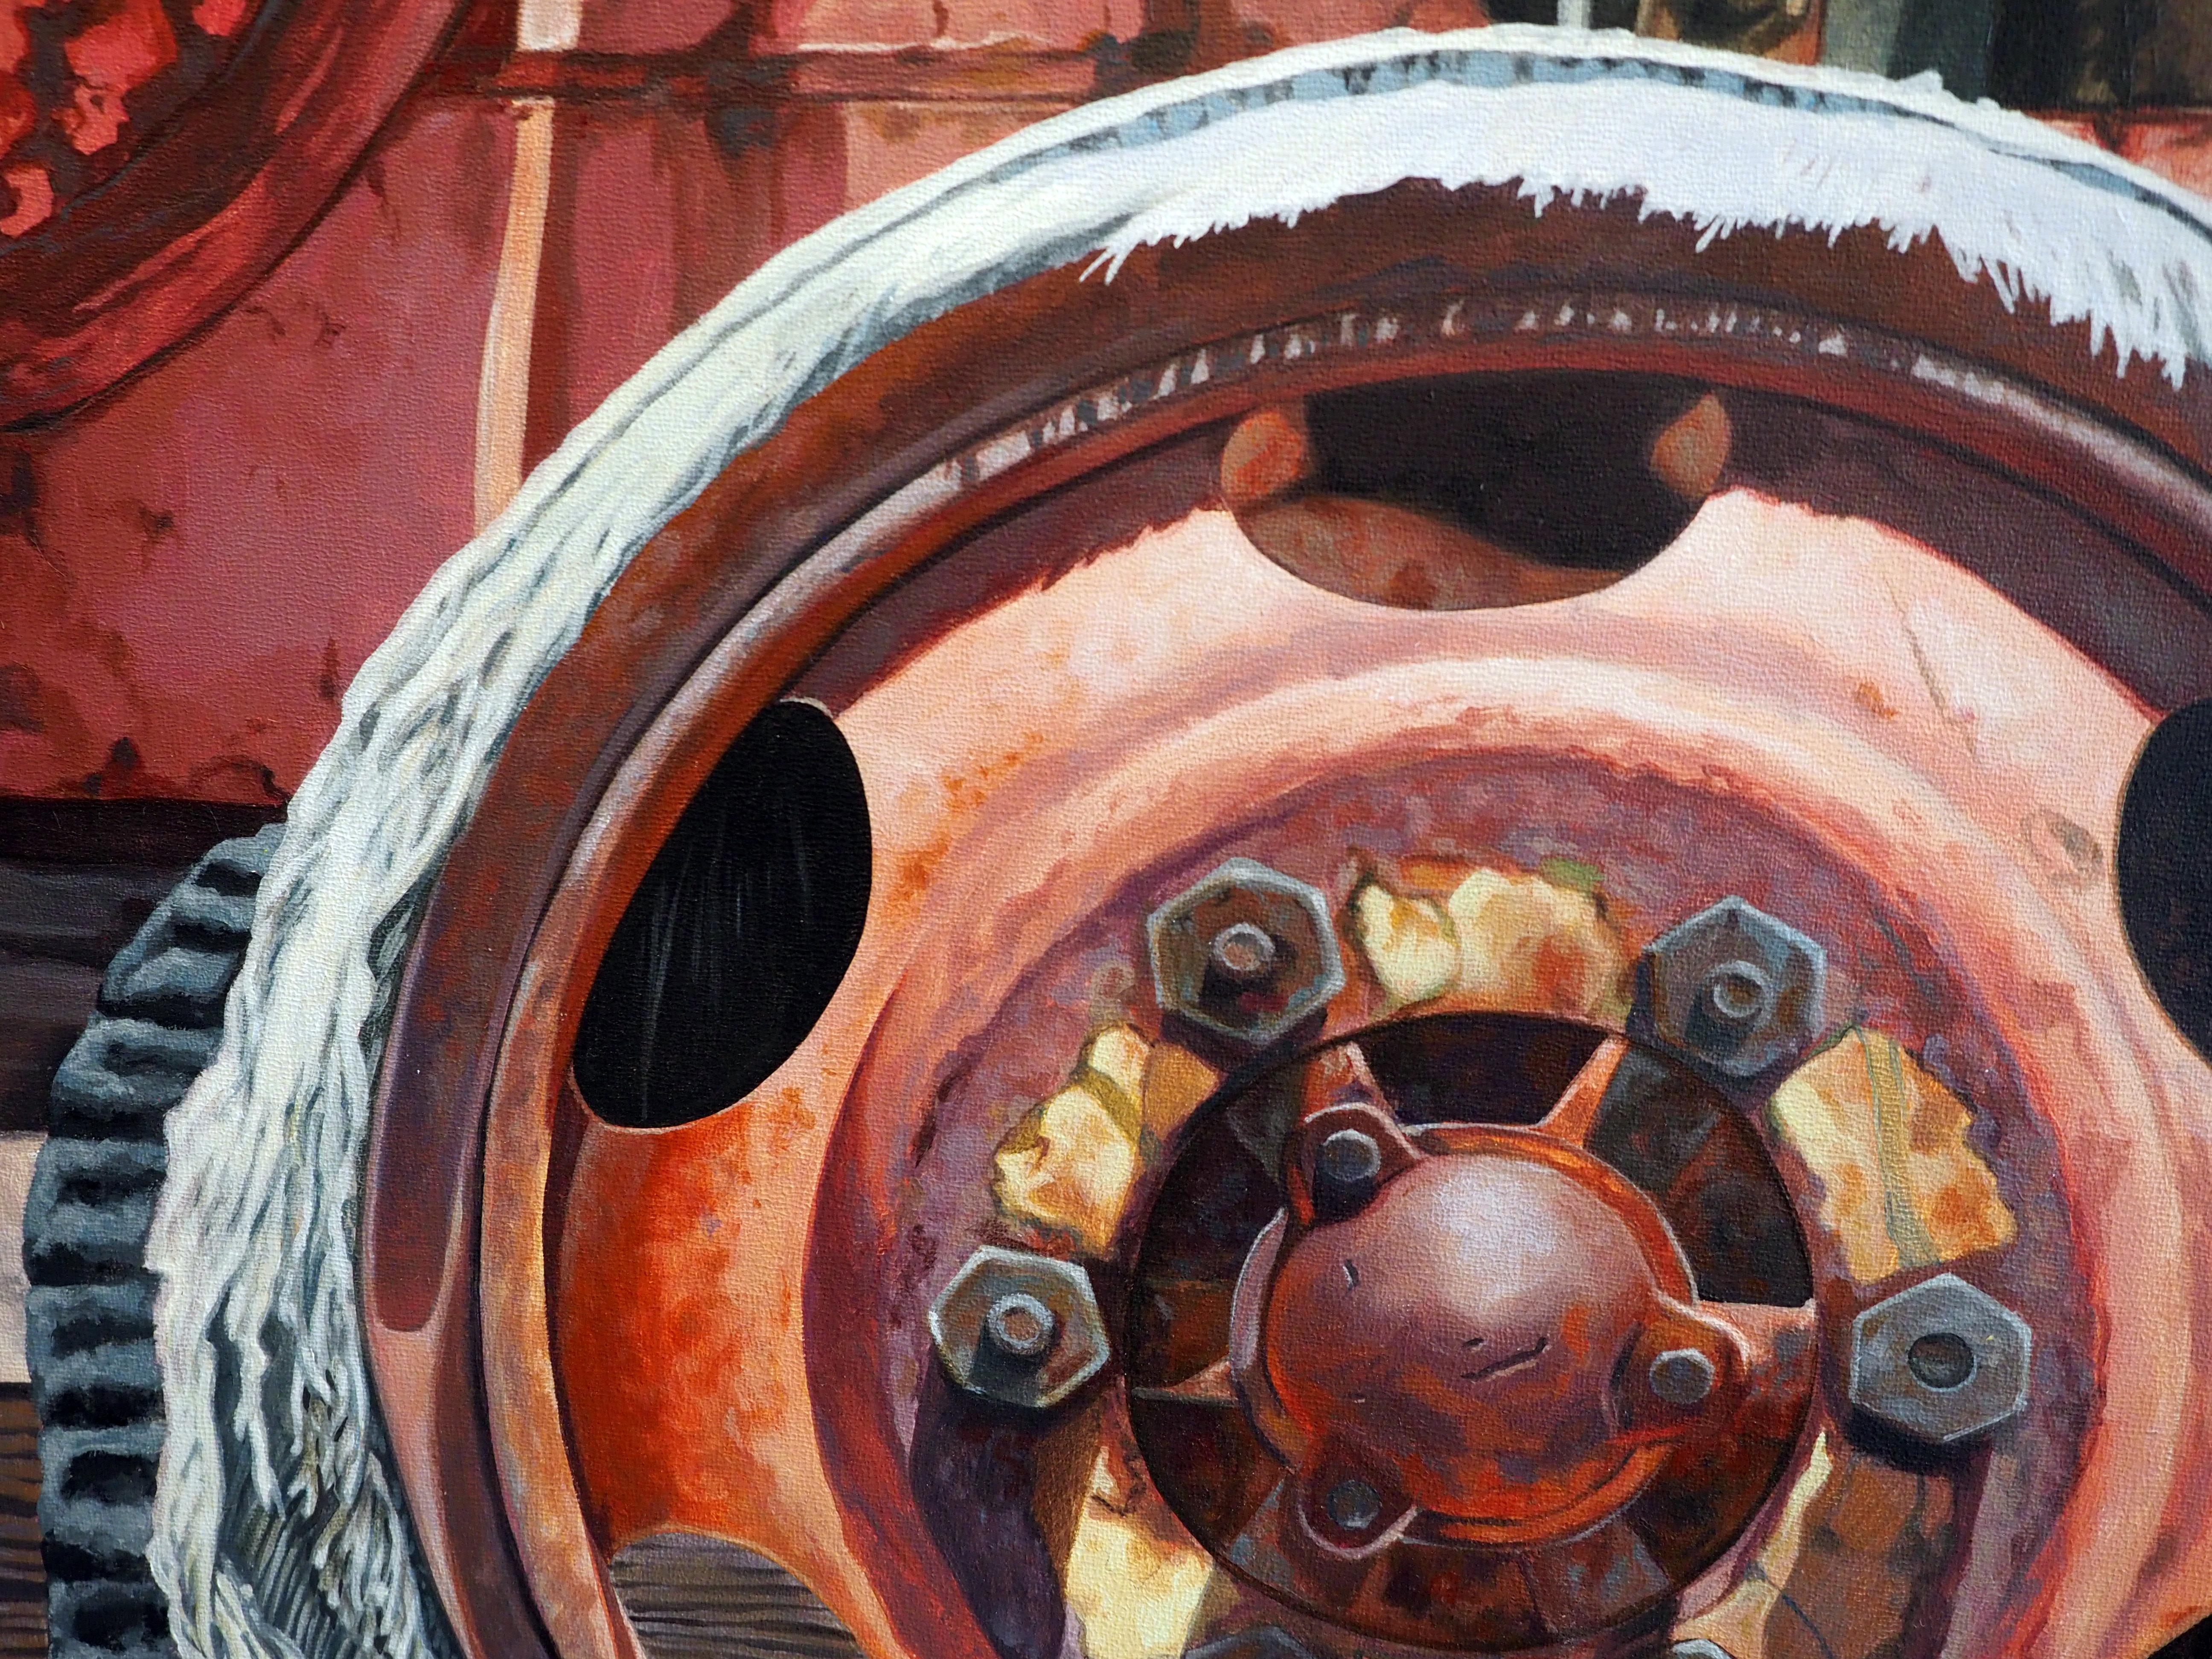 Run Rot is a hyperrealist piece with captivating colors of an old tire using red, burn umber, and grey-toned hues.  This particular painting based on a photograph taken at a ghost town just outside the Superstition Mountain Range in Arizona. A